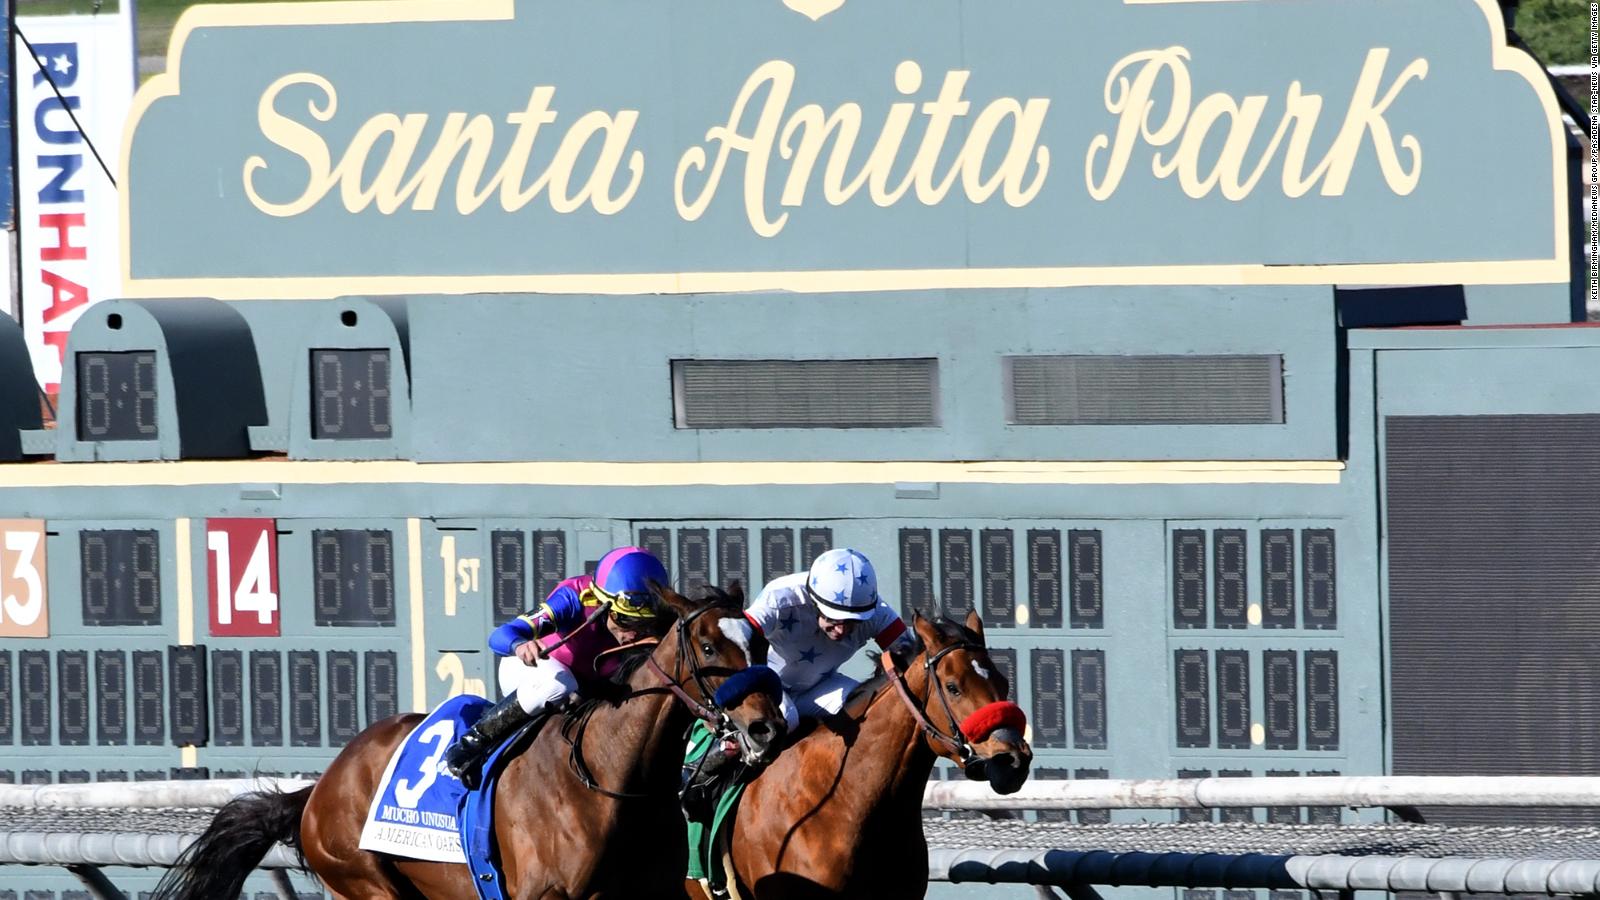 another-racehorse-the-fourth-this-year-dies-at-santa-anita-racing-track-cnn